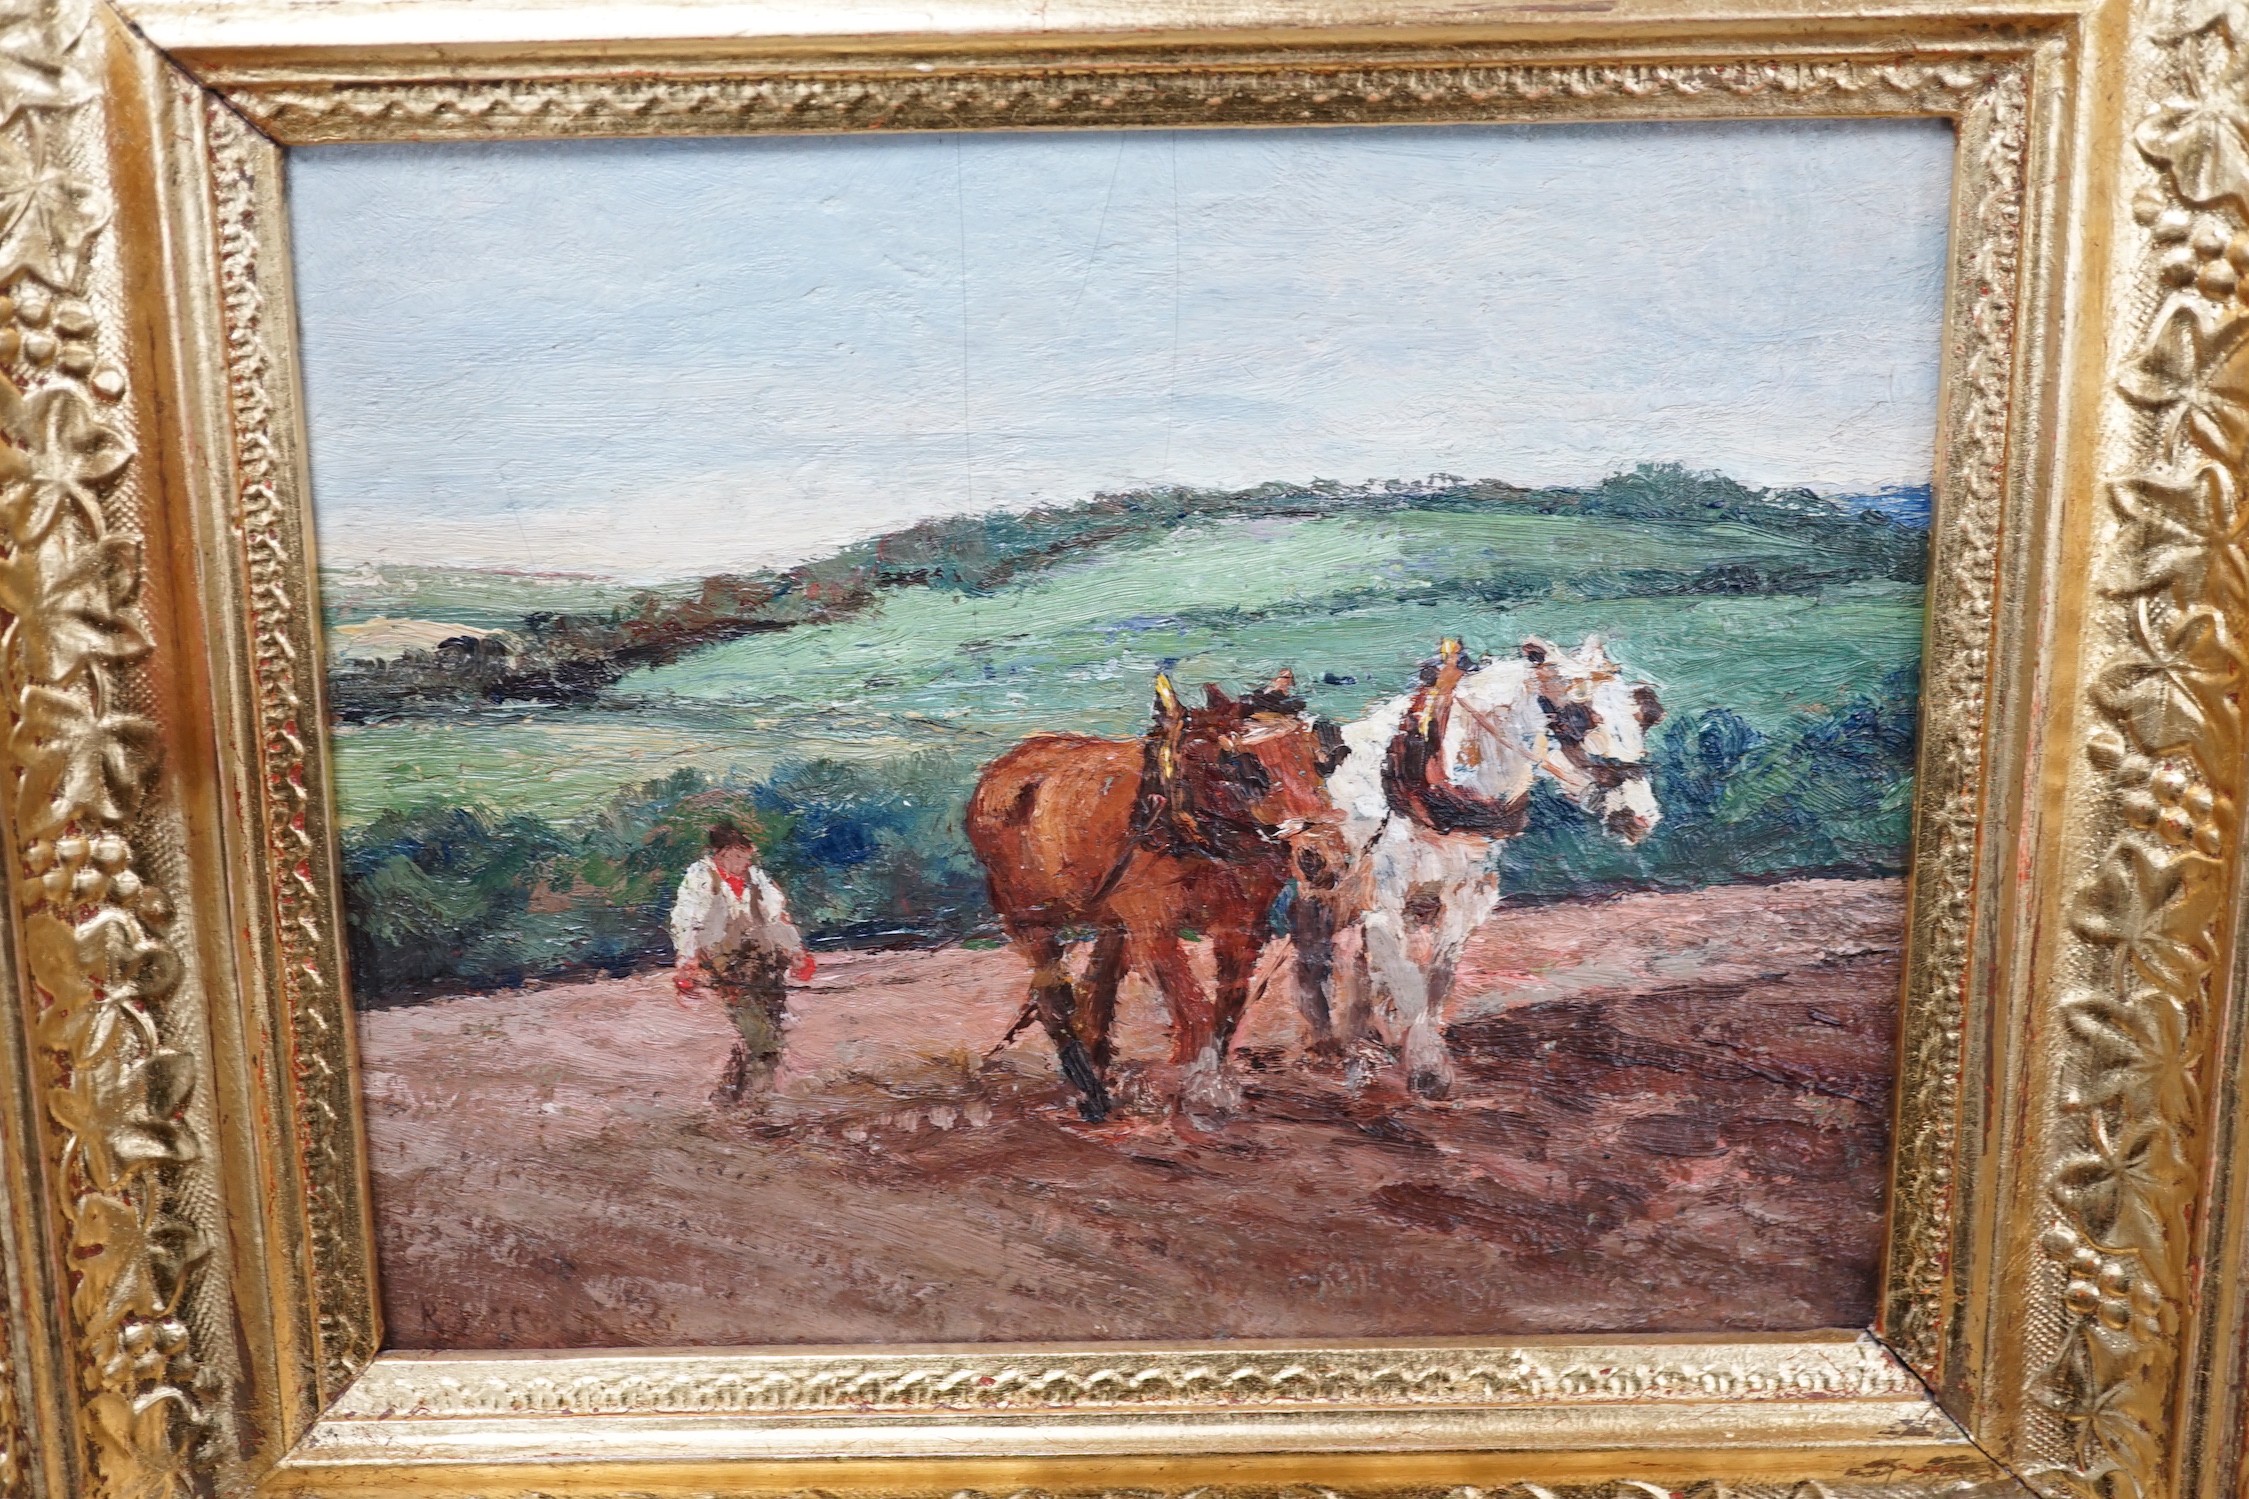 John Muirhead (1863-1927) and Others, watercolour, 'Hemingford, Abbots', signed, 16 x 25cm, R.Coleman, oil on board, Ploughing scene, two engraved maps and a small Dutch style oil winter scene